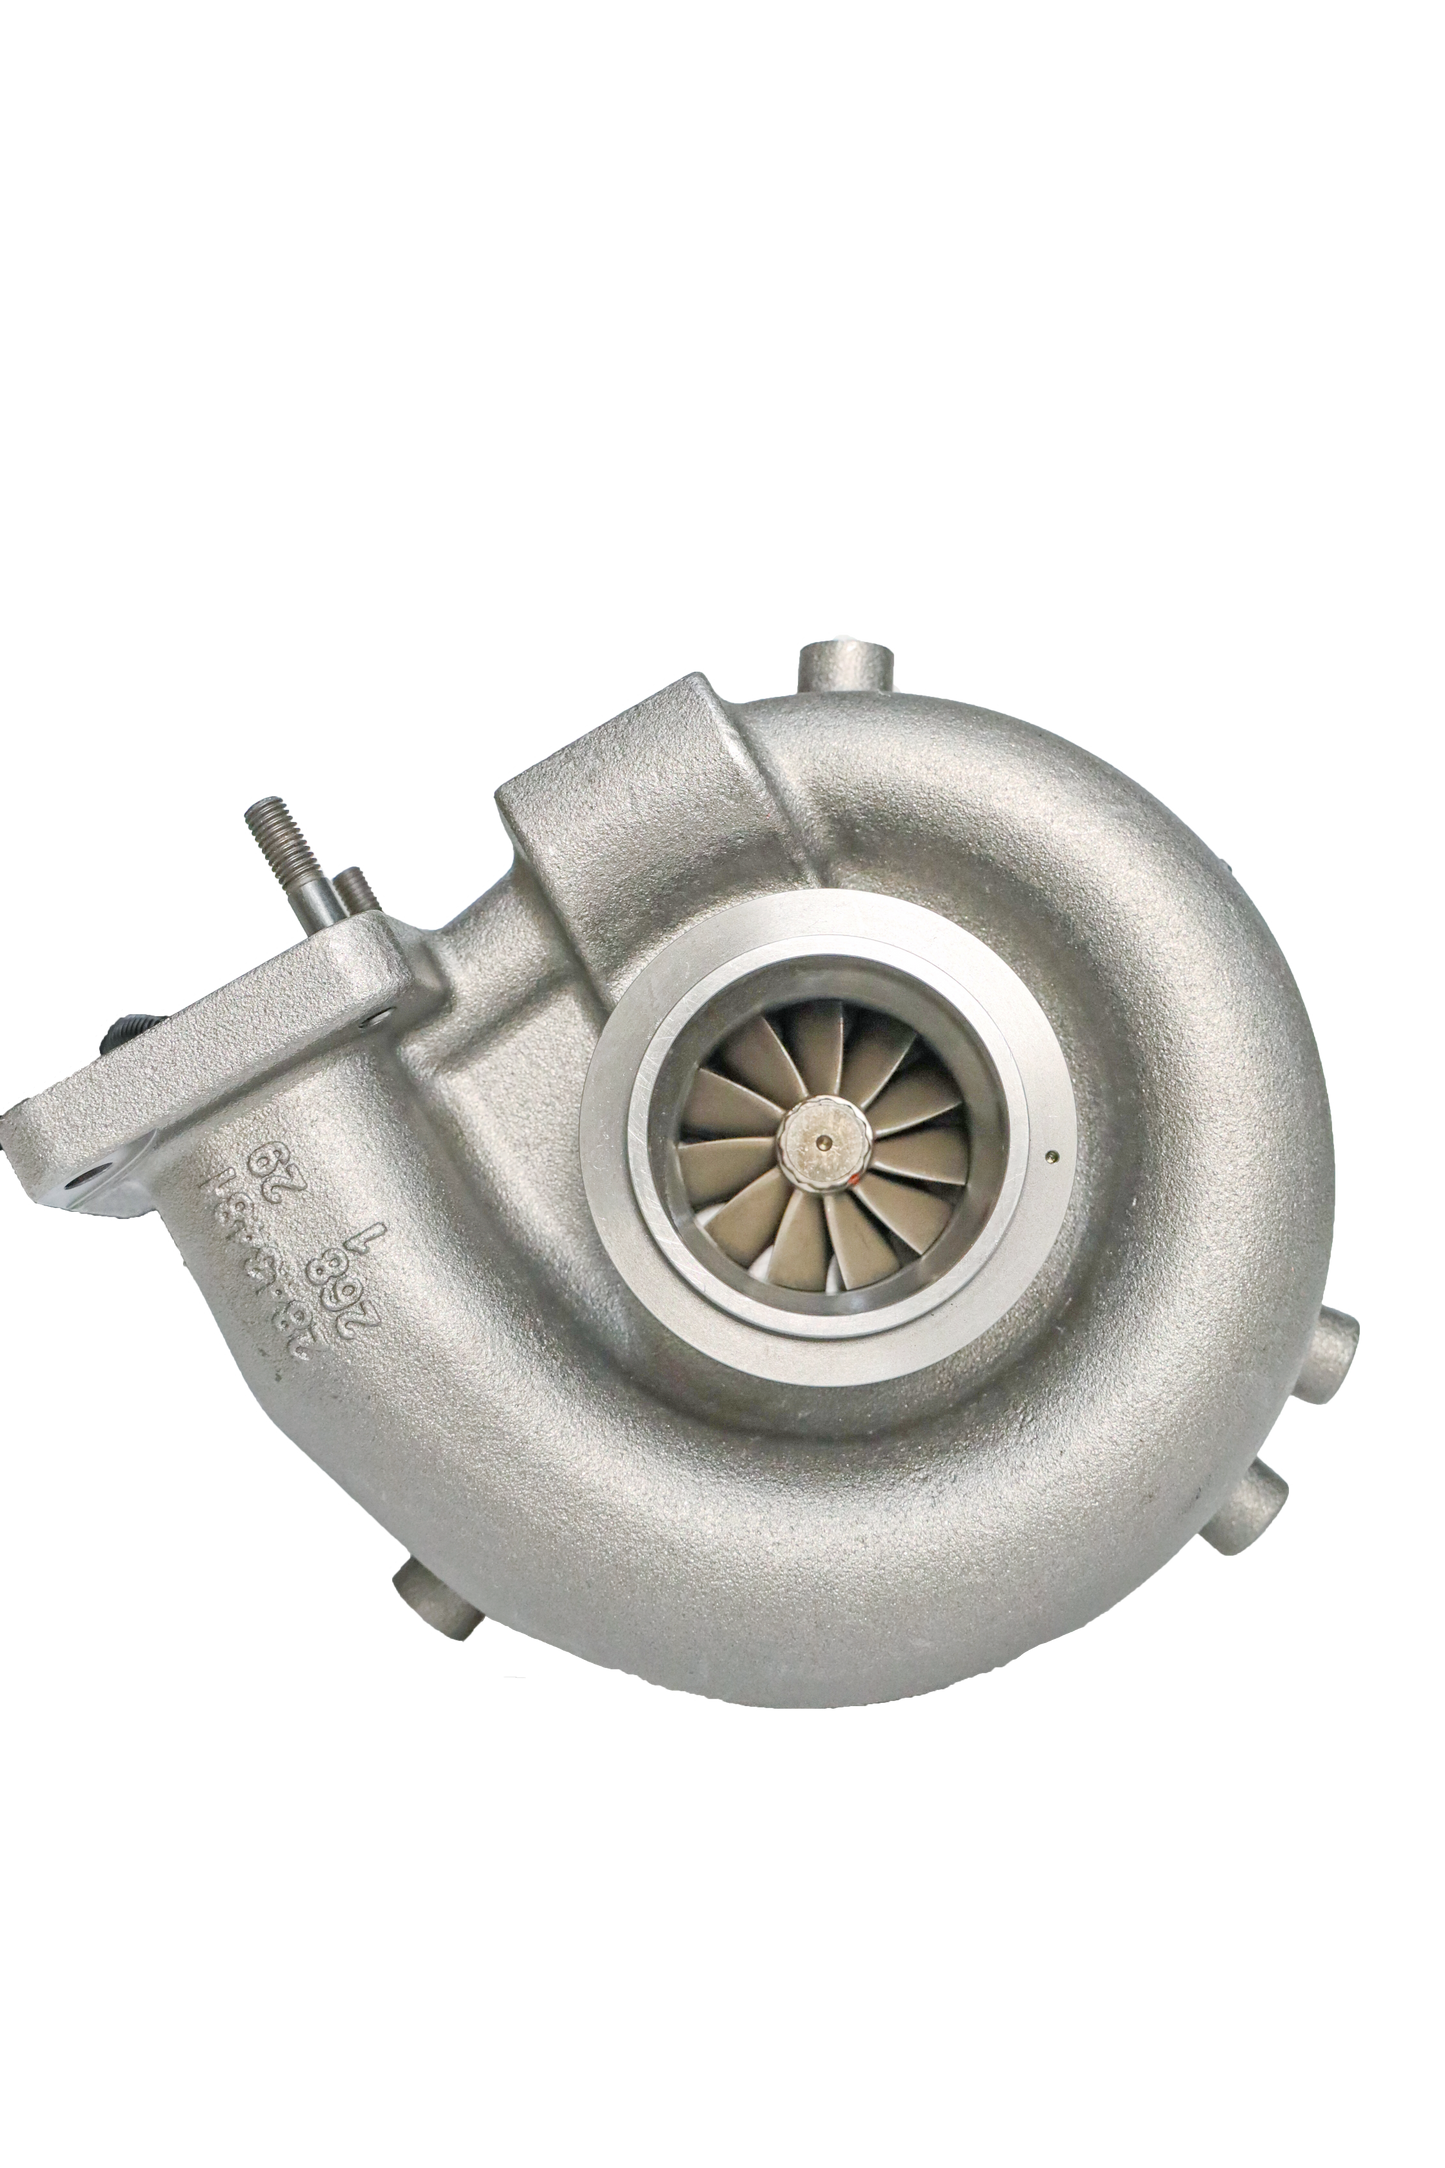 2882112 RX Cummins ISX HE451VE Remanufactured Turbocharger